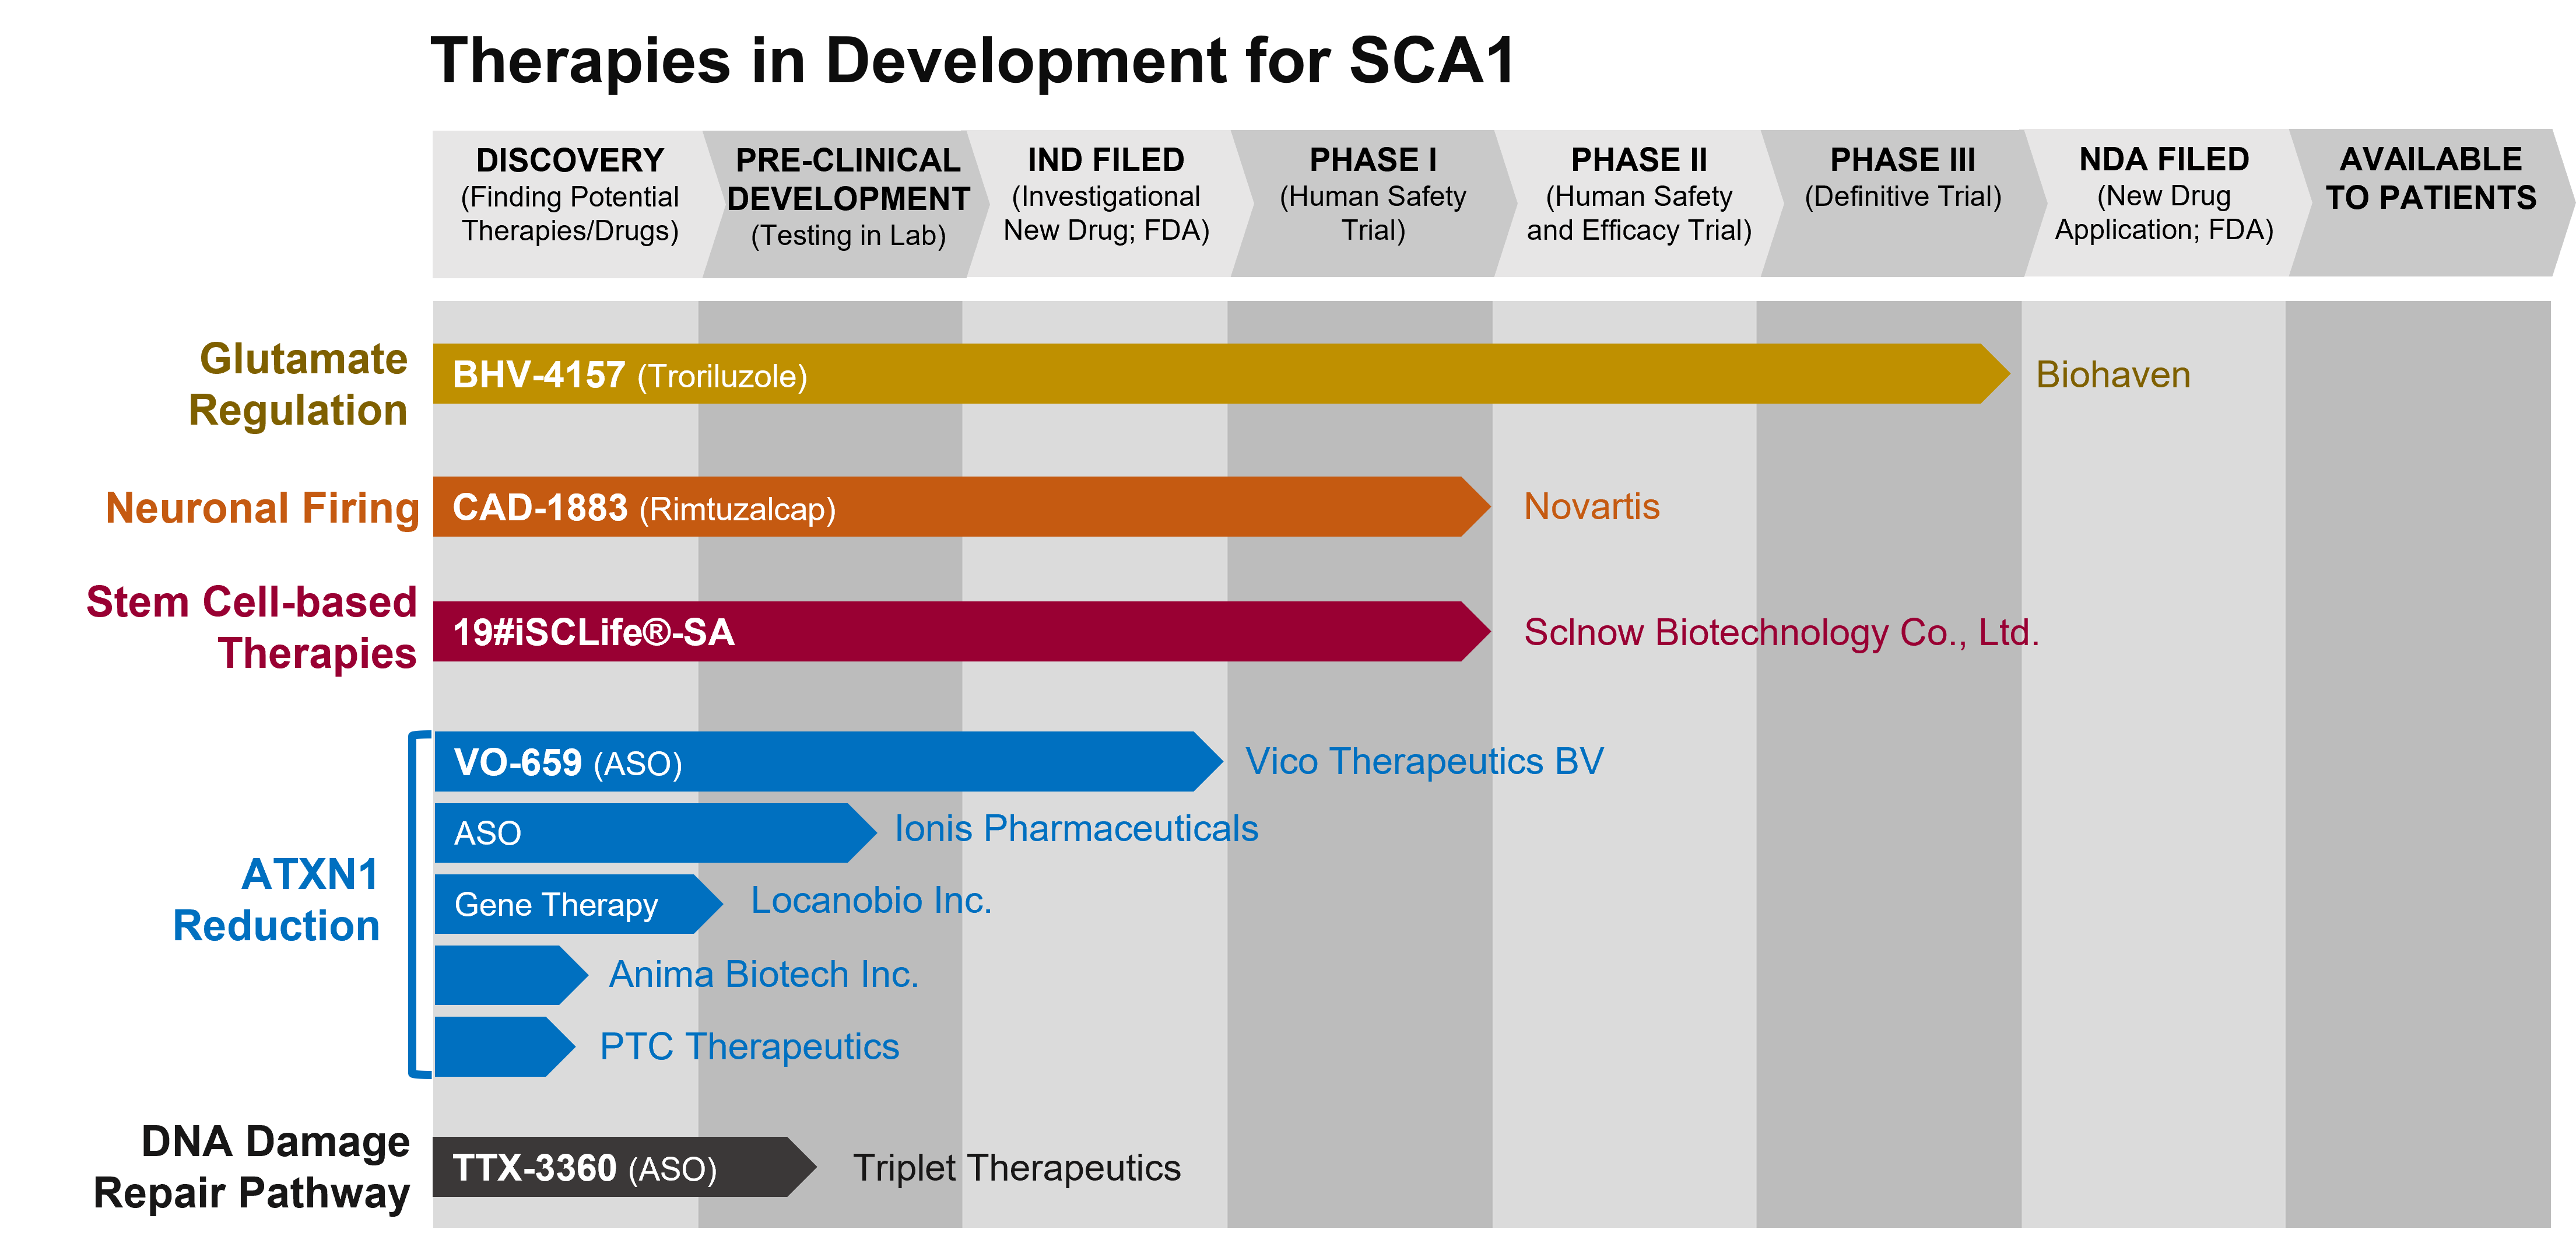 Graph depicting the phase of drug development for various drugs to treat SCA1